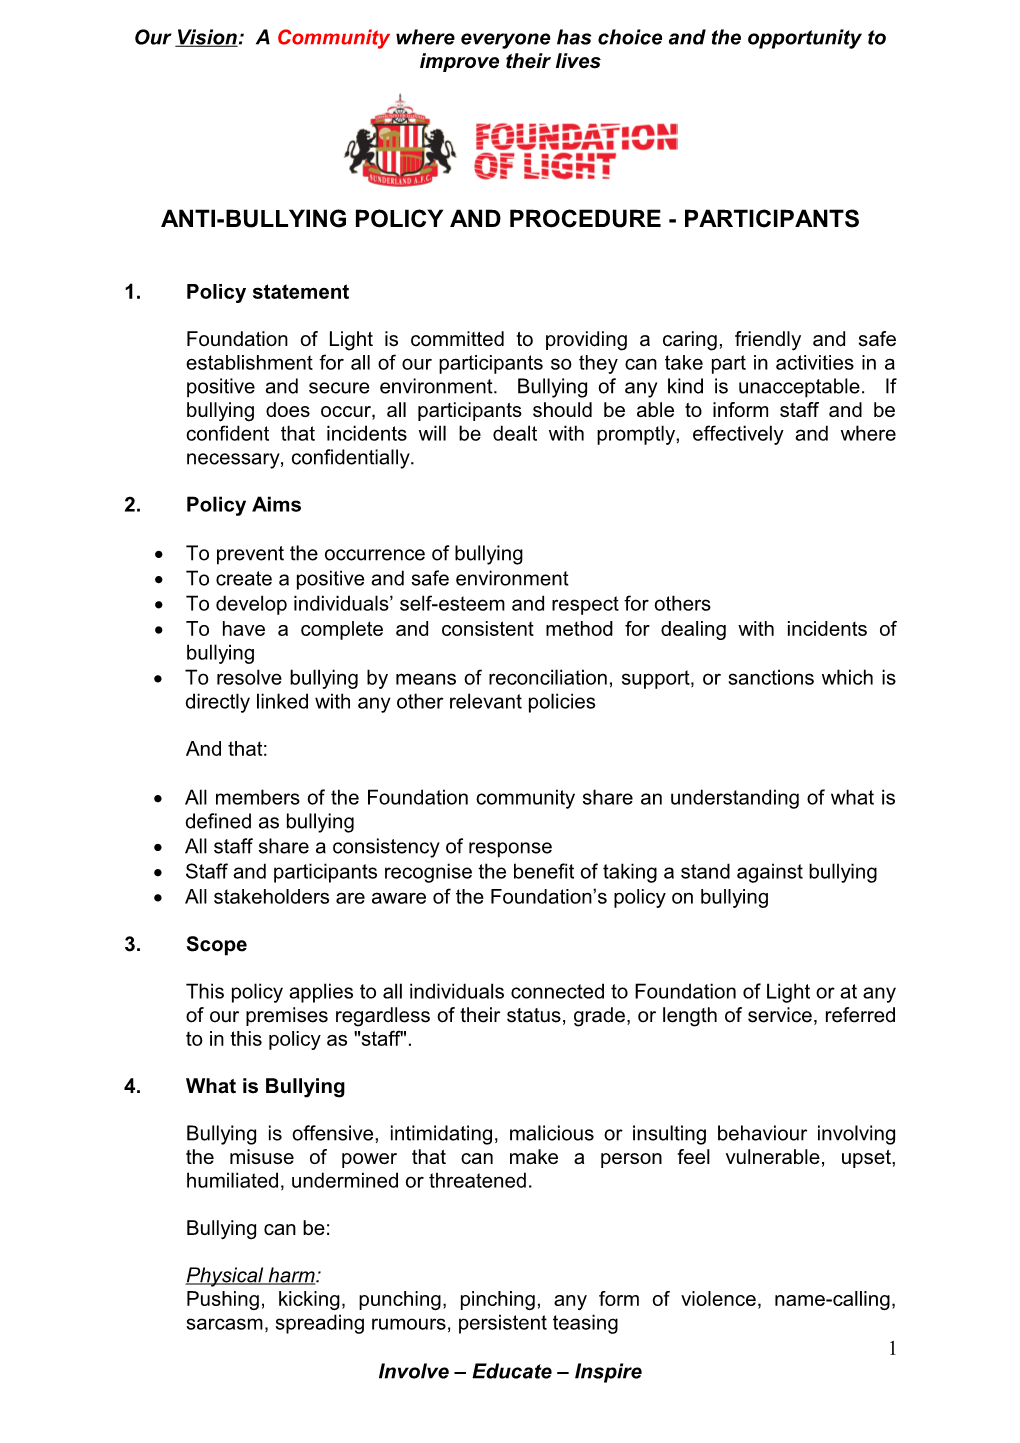 ANTI-BULLYING Policy and Procedure - PARTICIPANTS